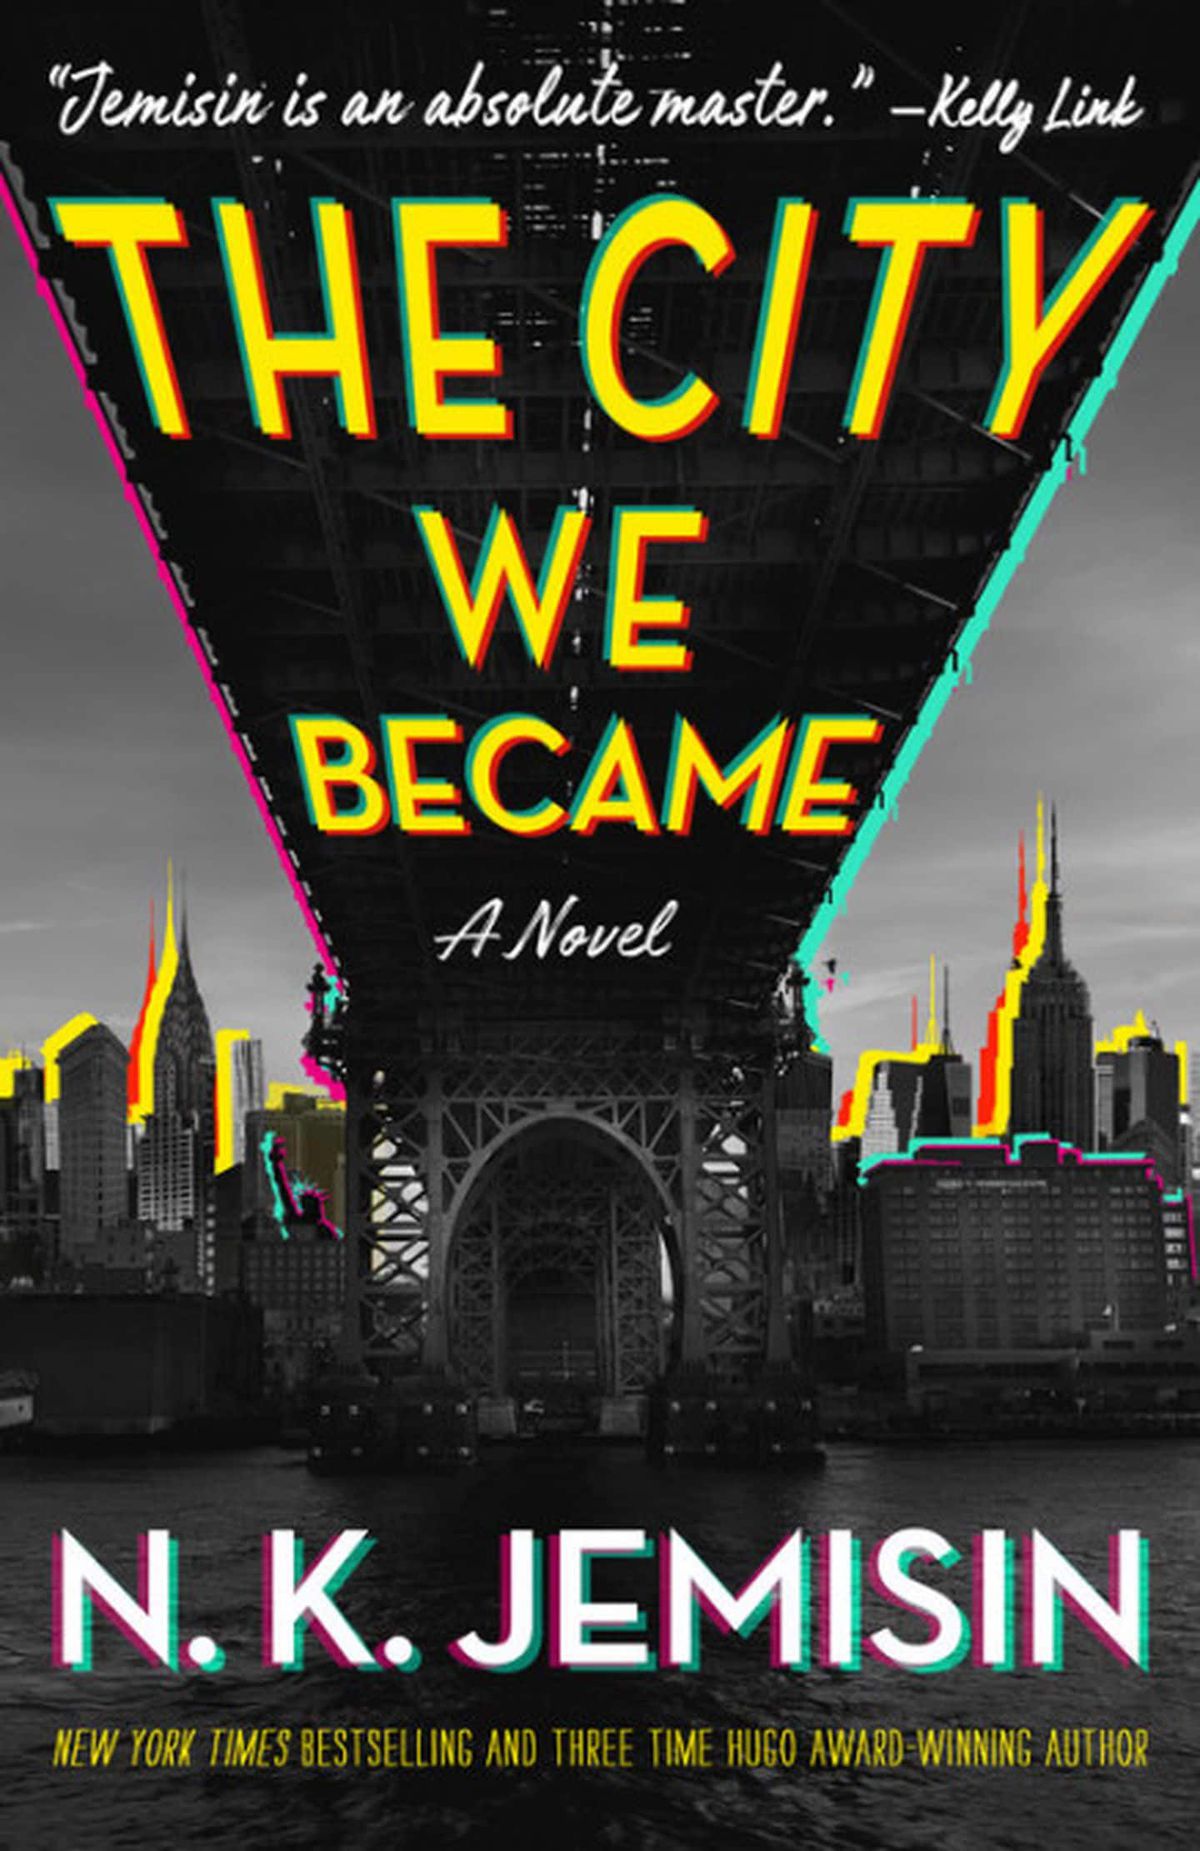 a glowing city on the cover of The City We Became by N.K. Jemisin